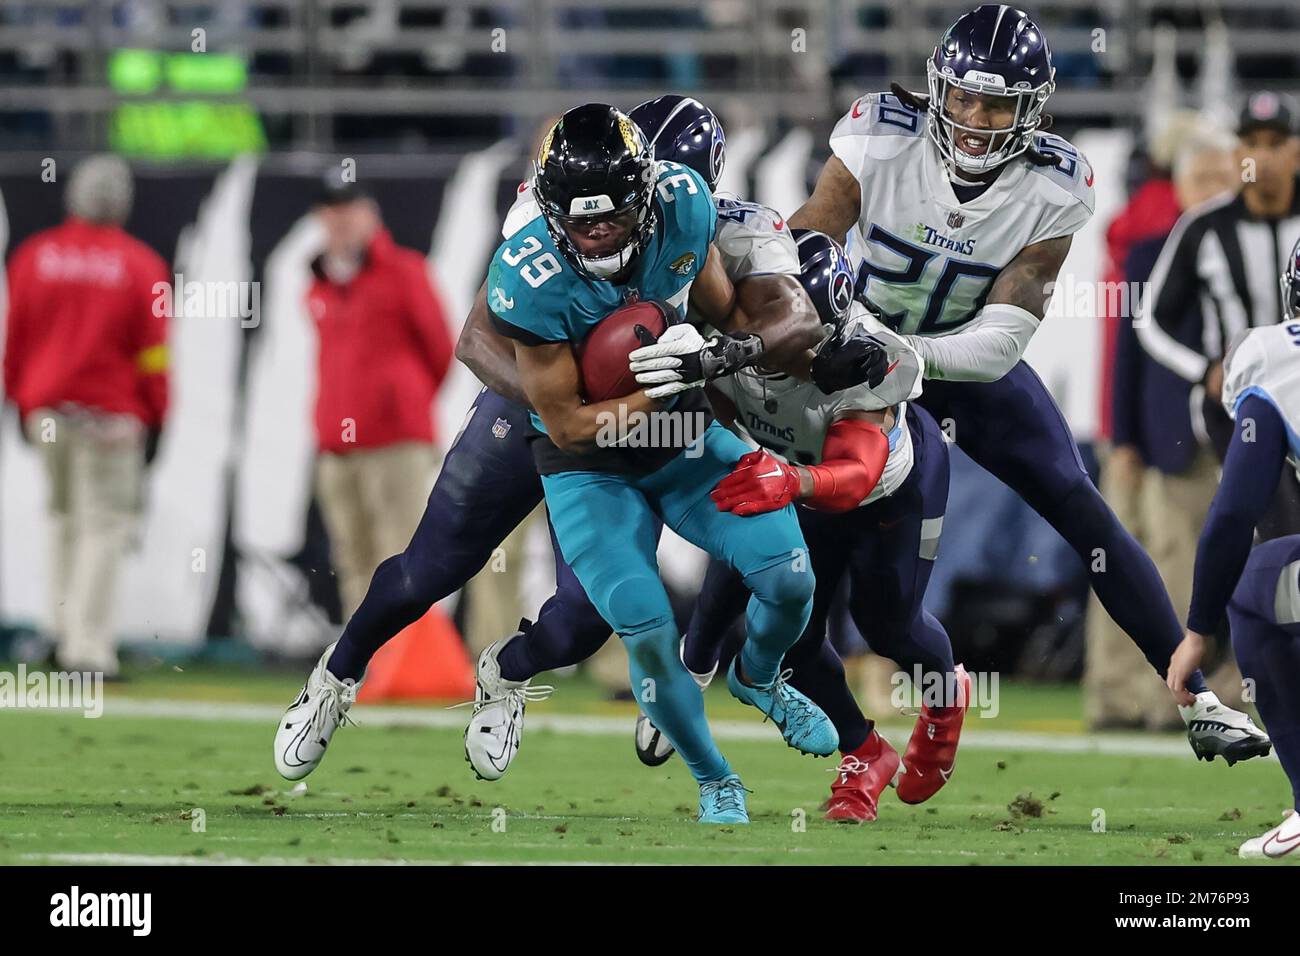 Jacksonville, Florida, USA. January 7, 2023: Jacksonville Jaguars wide  receiver JAMAL AGNEW (39) gets tackled after returning the ball during the  Jacksonville Jaguars vs Tennessee Titans NFL game at TIAA Bank Field